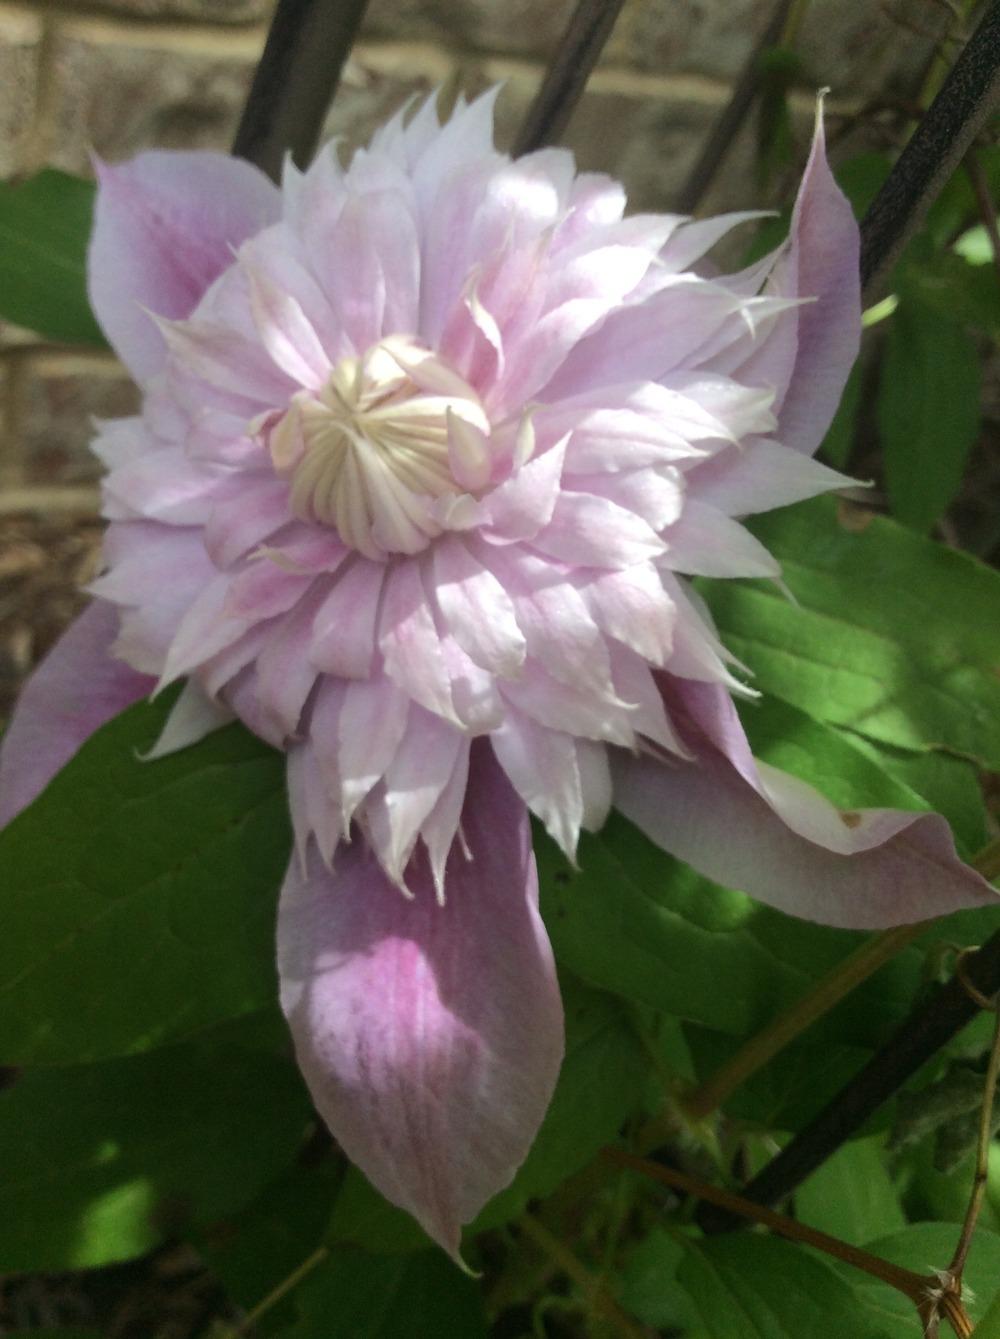 Photo of Clematis Josephine™ uploaded by clintbrown